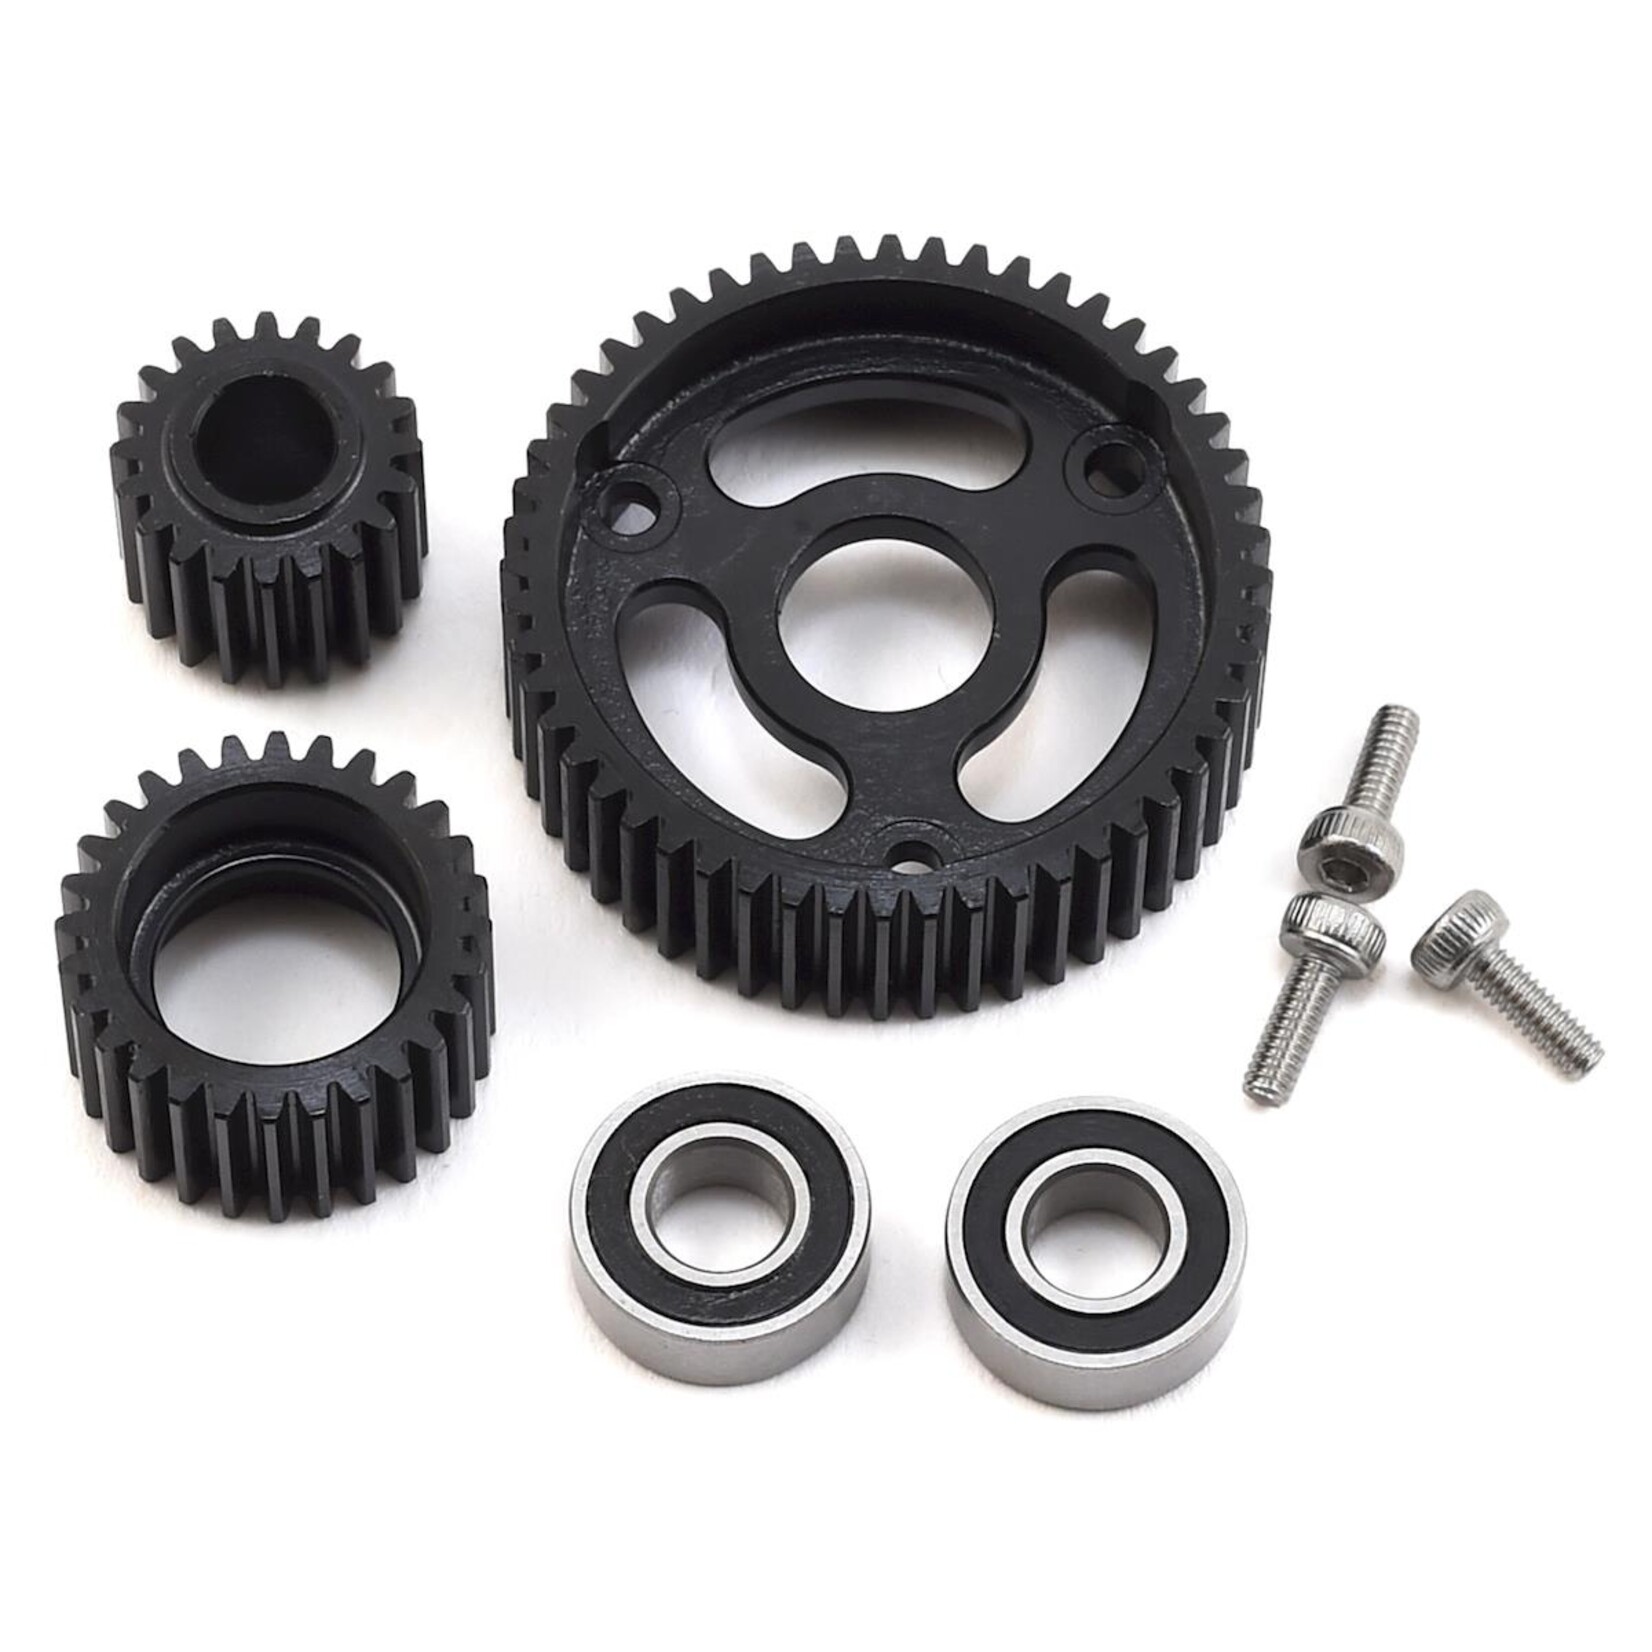 Incision Incision Steel Transmission Gear Set #IRC00190